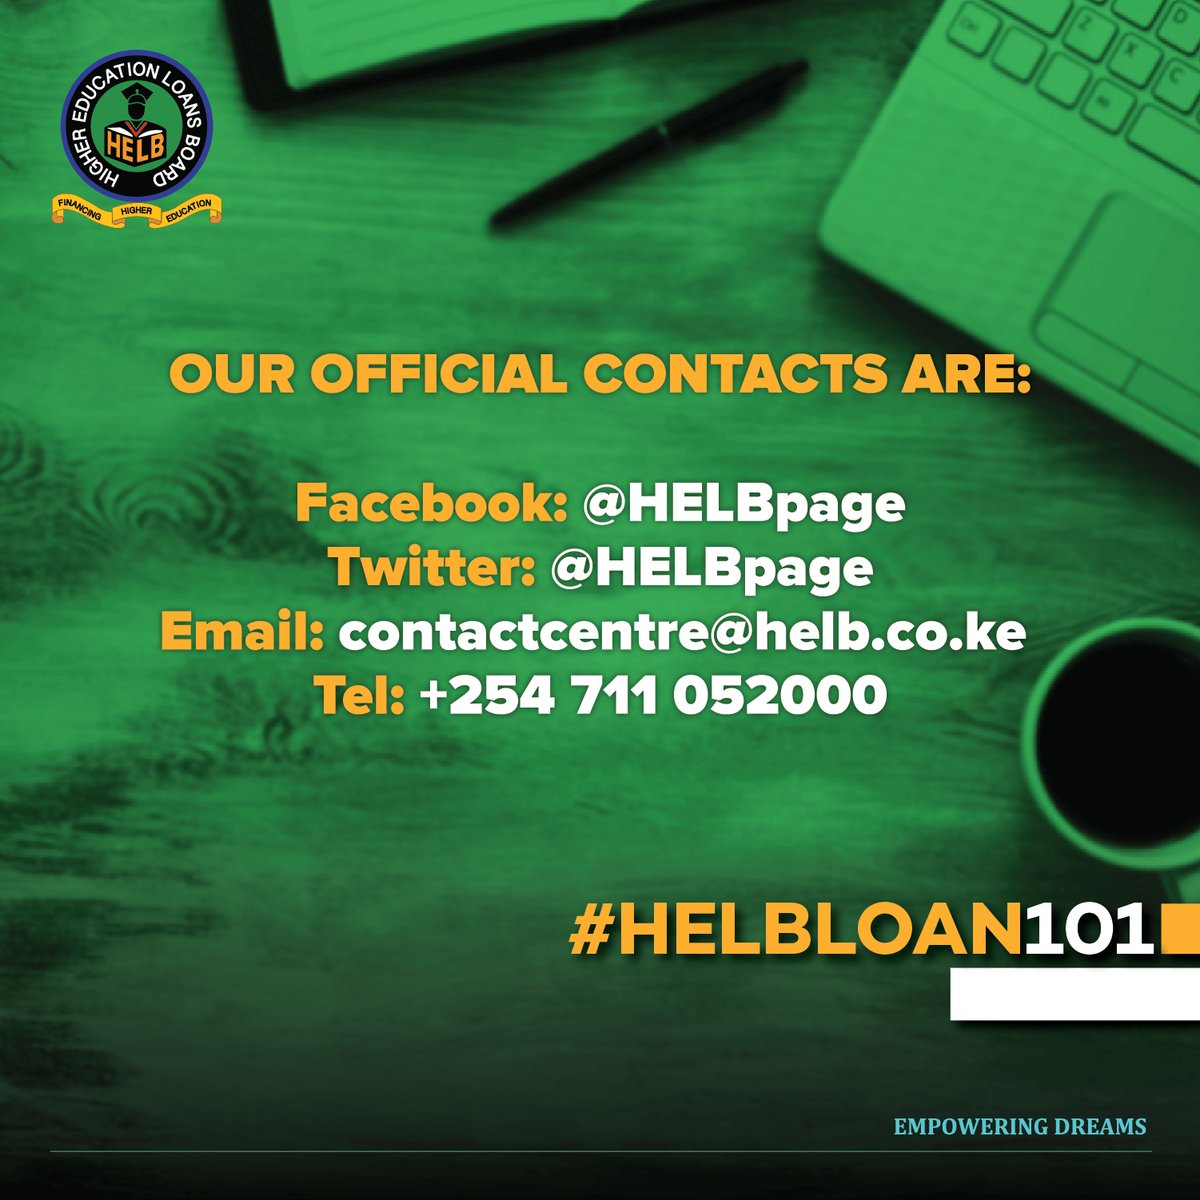 HELB Contacts: Telephone, Mobile, Email, Facebook